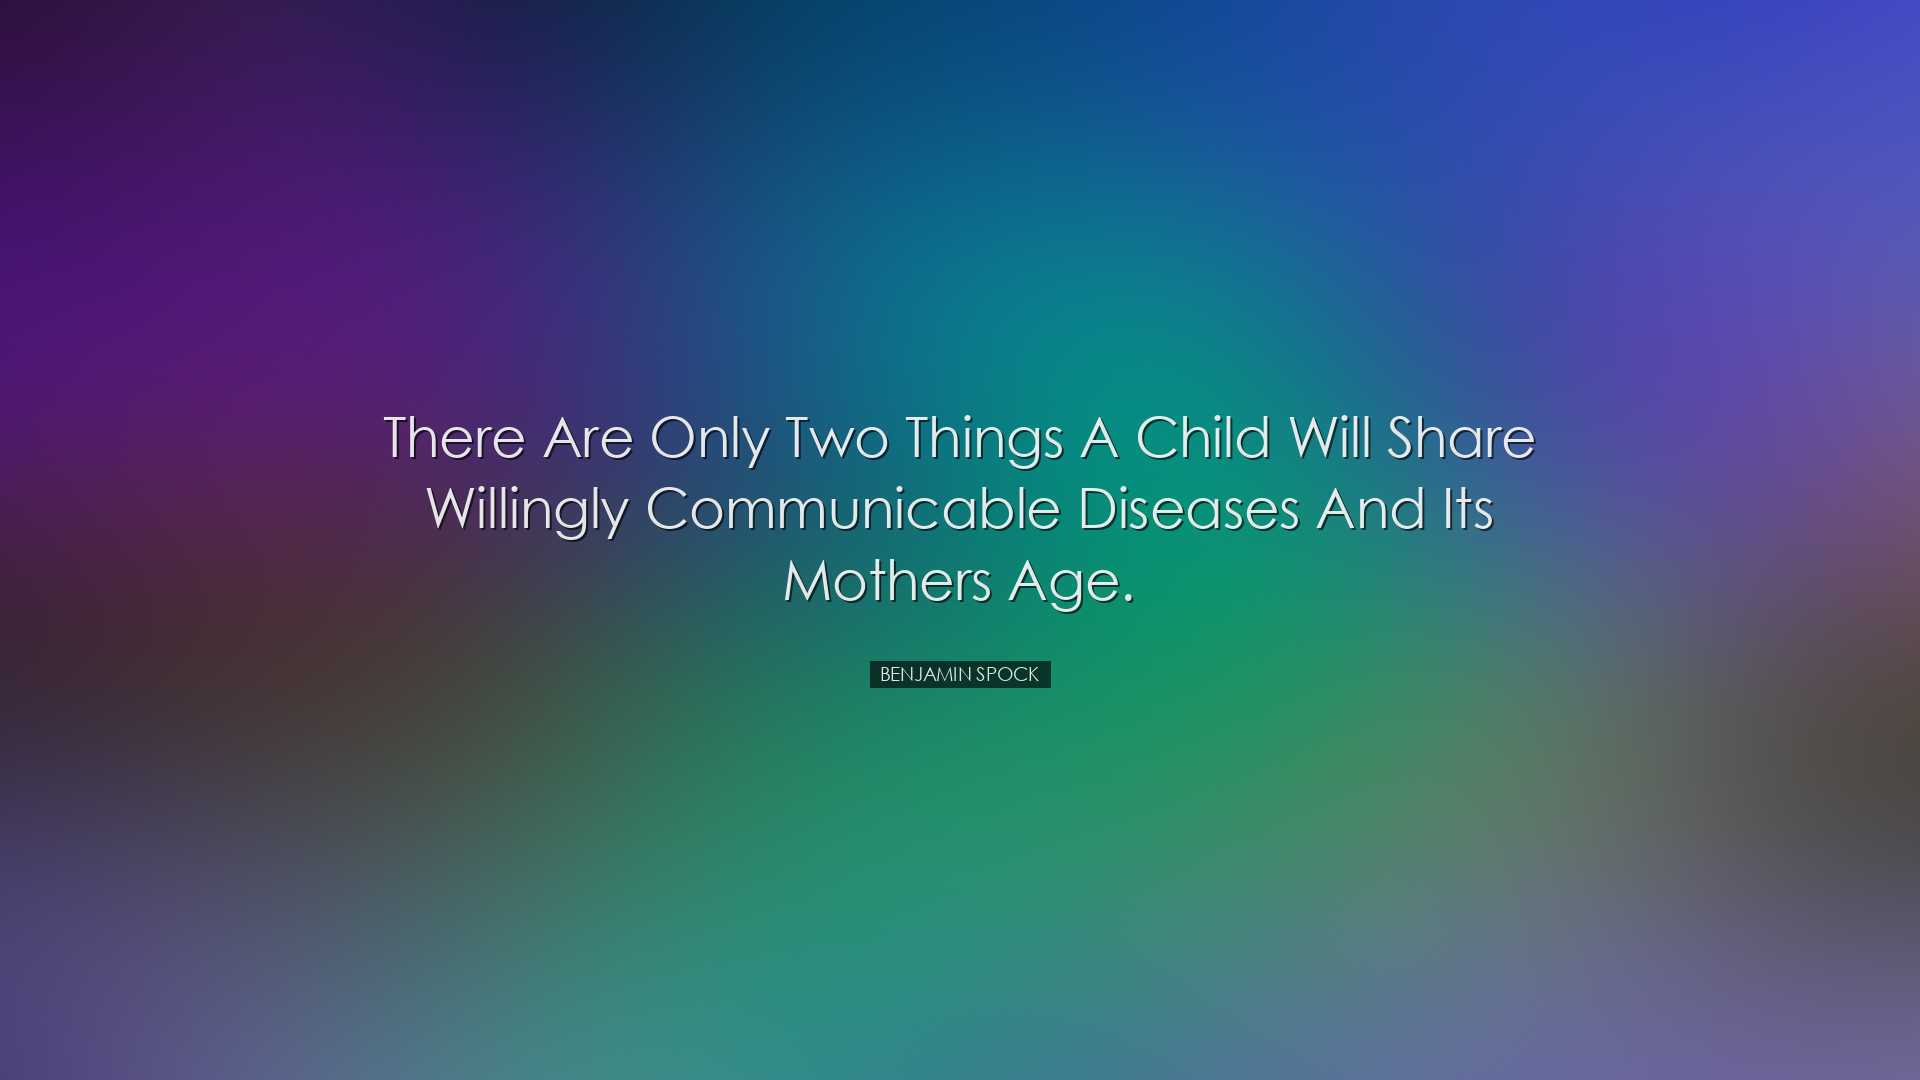 There are only two things a child will share willingly communicabl